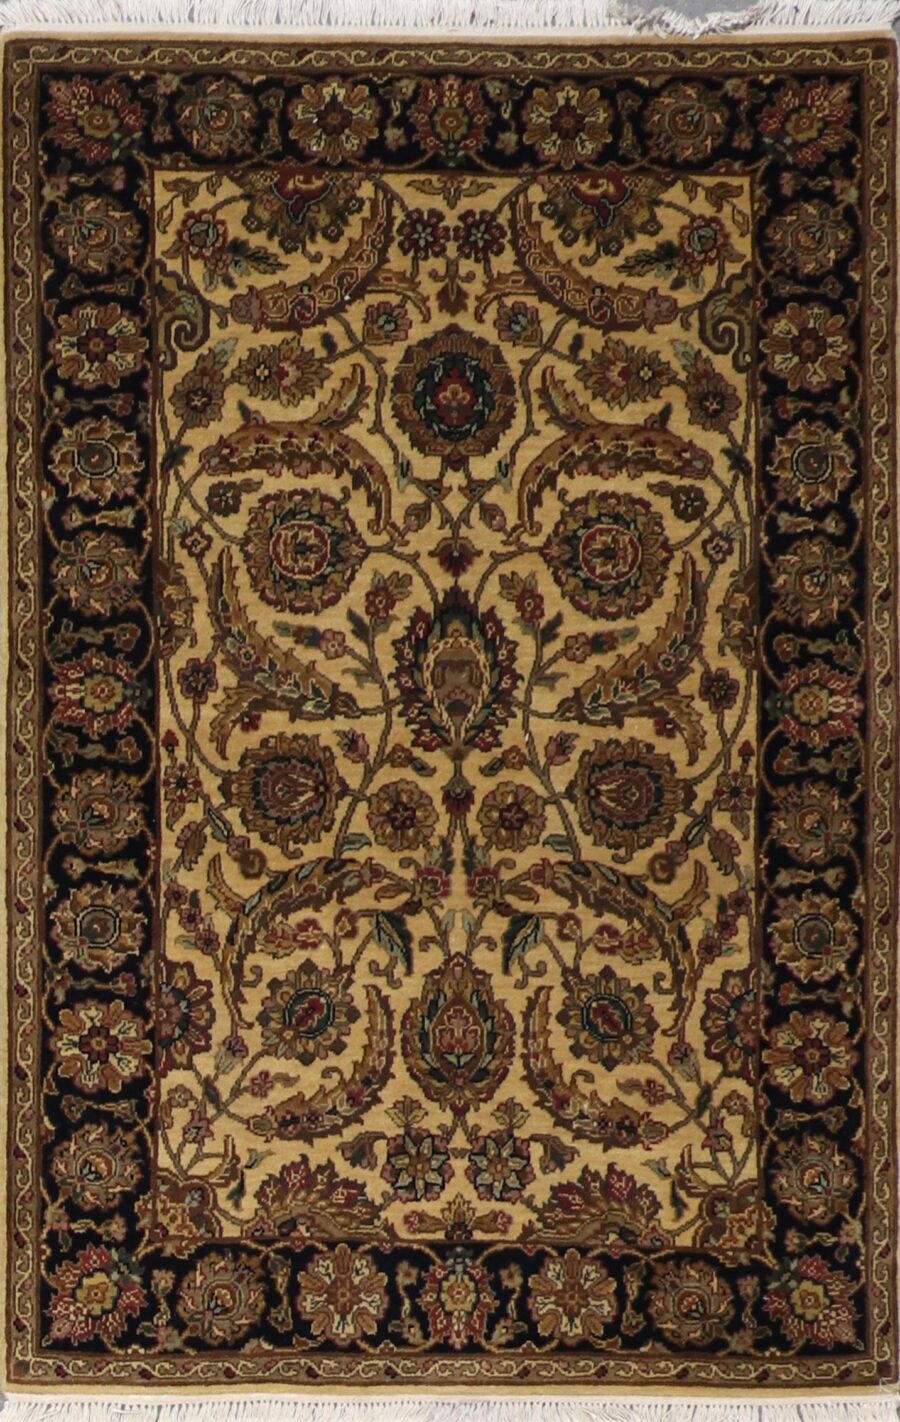 4’x6’2” Decorative Gold Wool Hand-Knotted Rug - Direct Rug Import | Rugs in Chicago, Indiana,South Bend,Granger